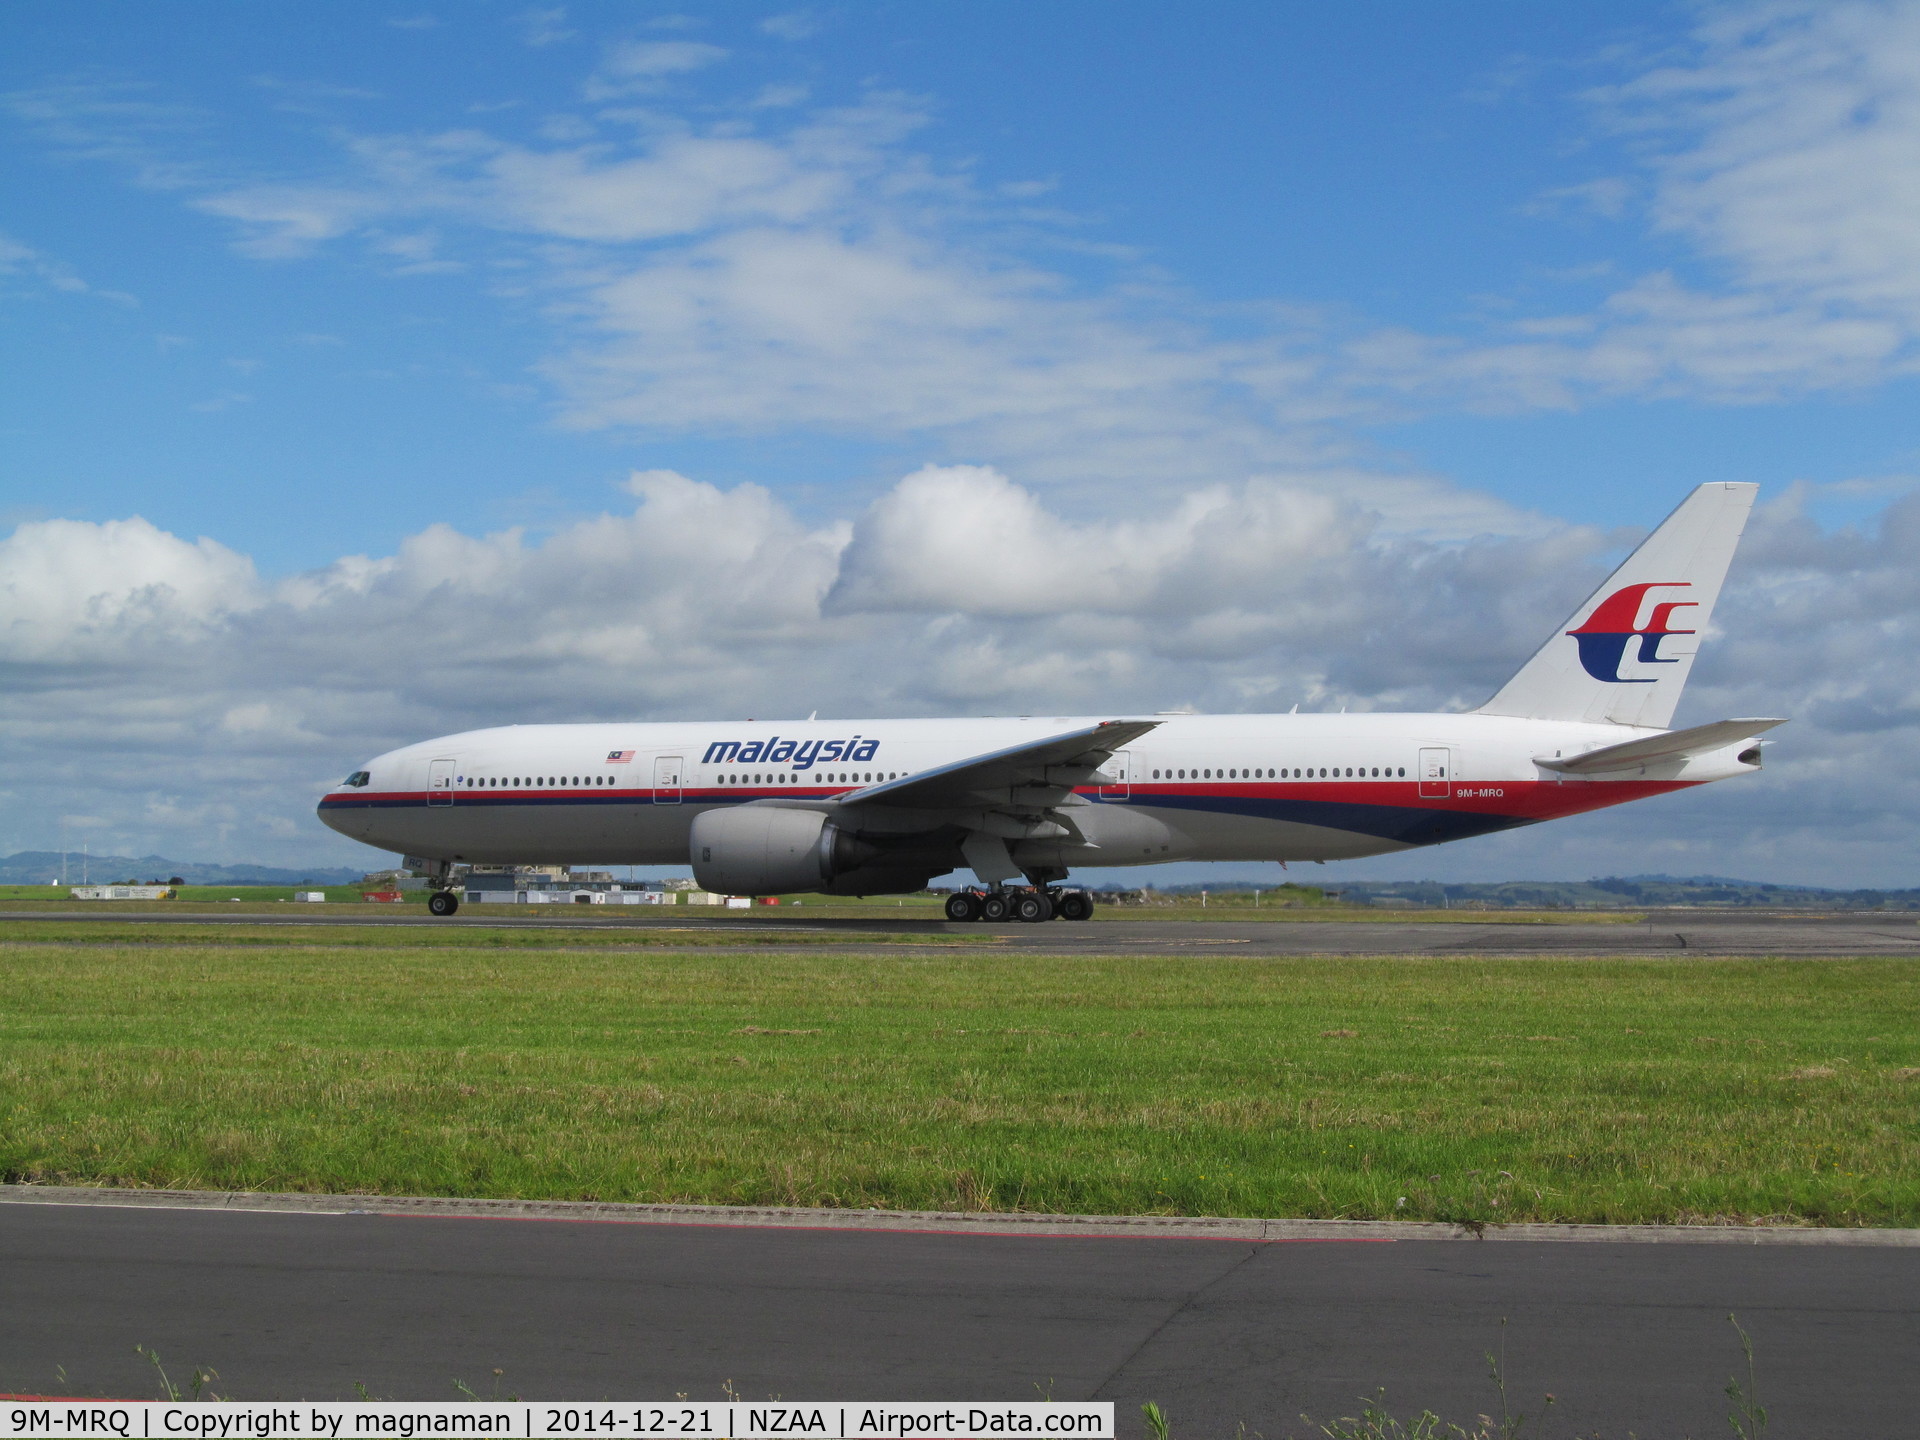 9M-MRQ, 2002 Boeing 777-2H6/ER C/N 28422, taxying for departure